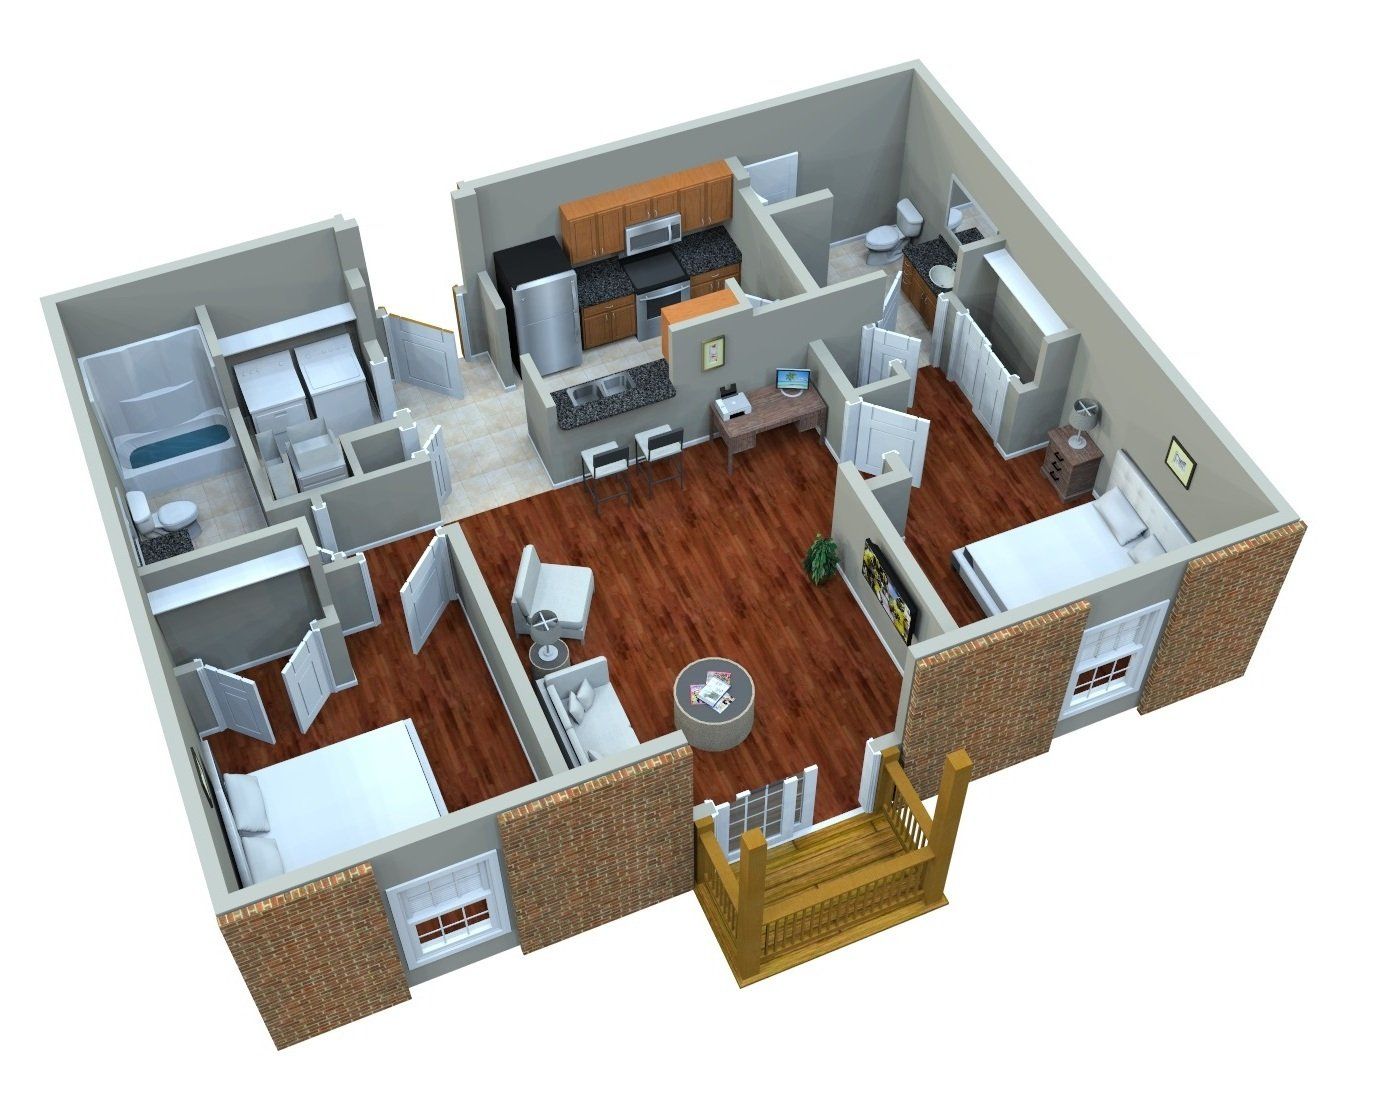 The Lofts at the Manor Offers Apartment Floor Plans With Hardwood Floors, Jacuzzi Tubs & More